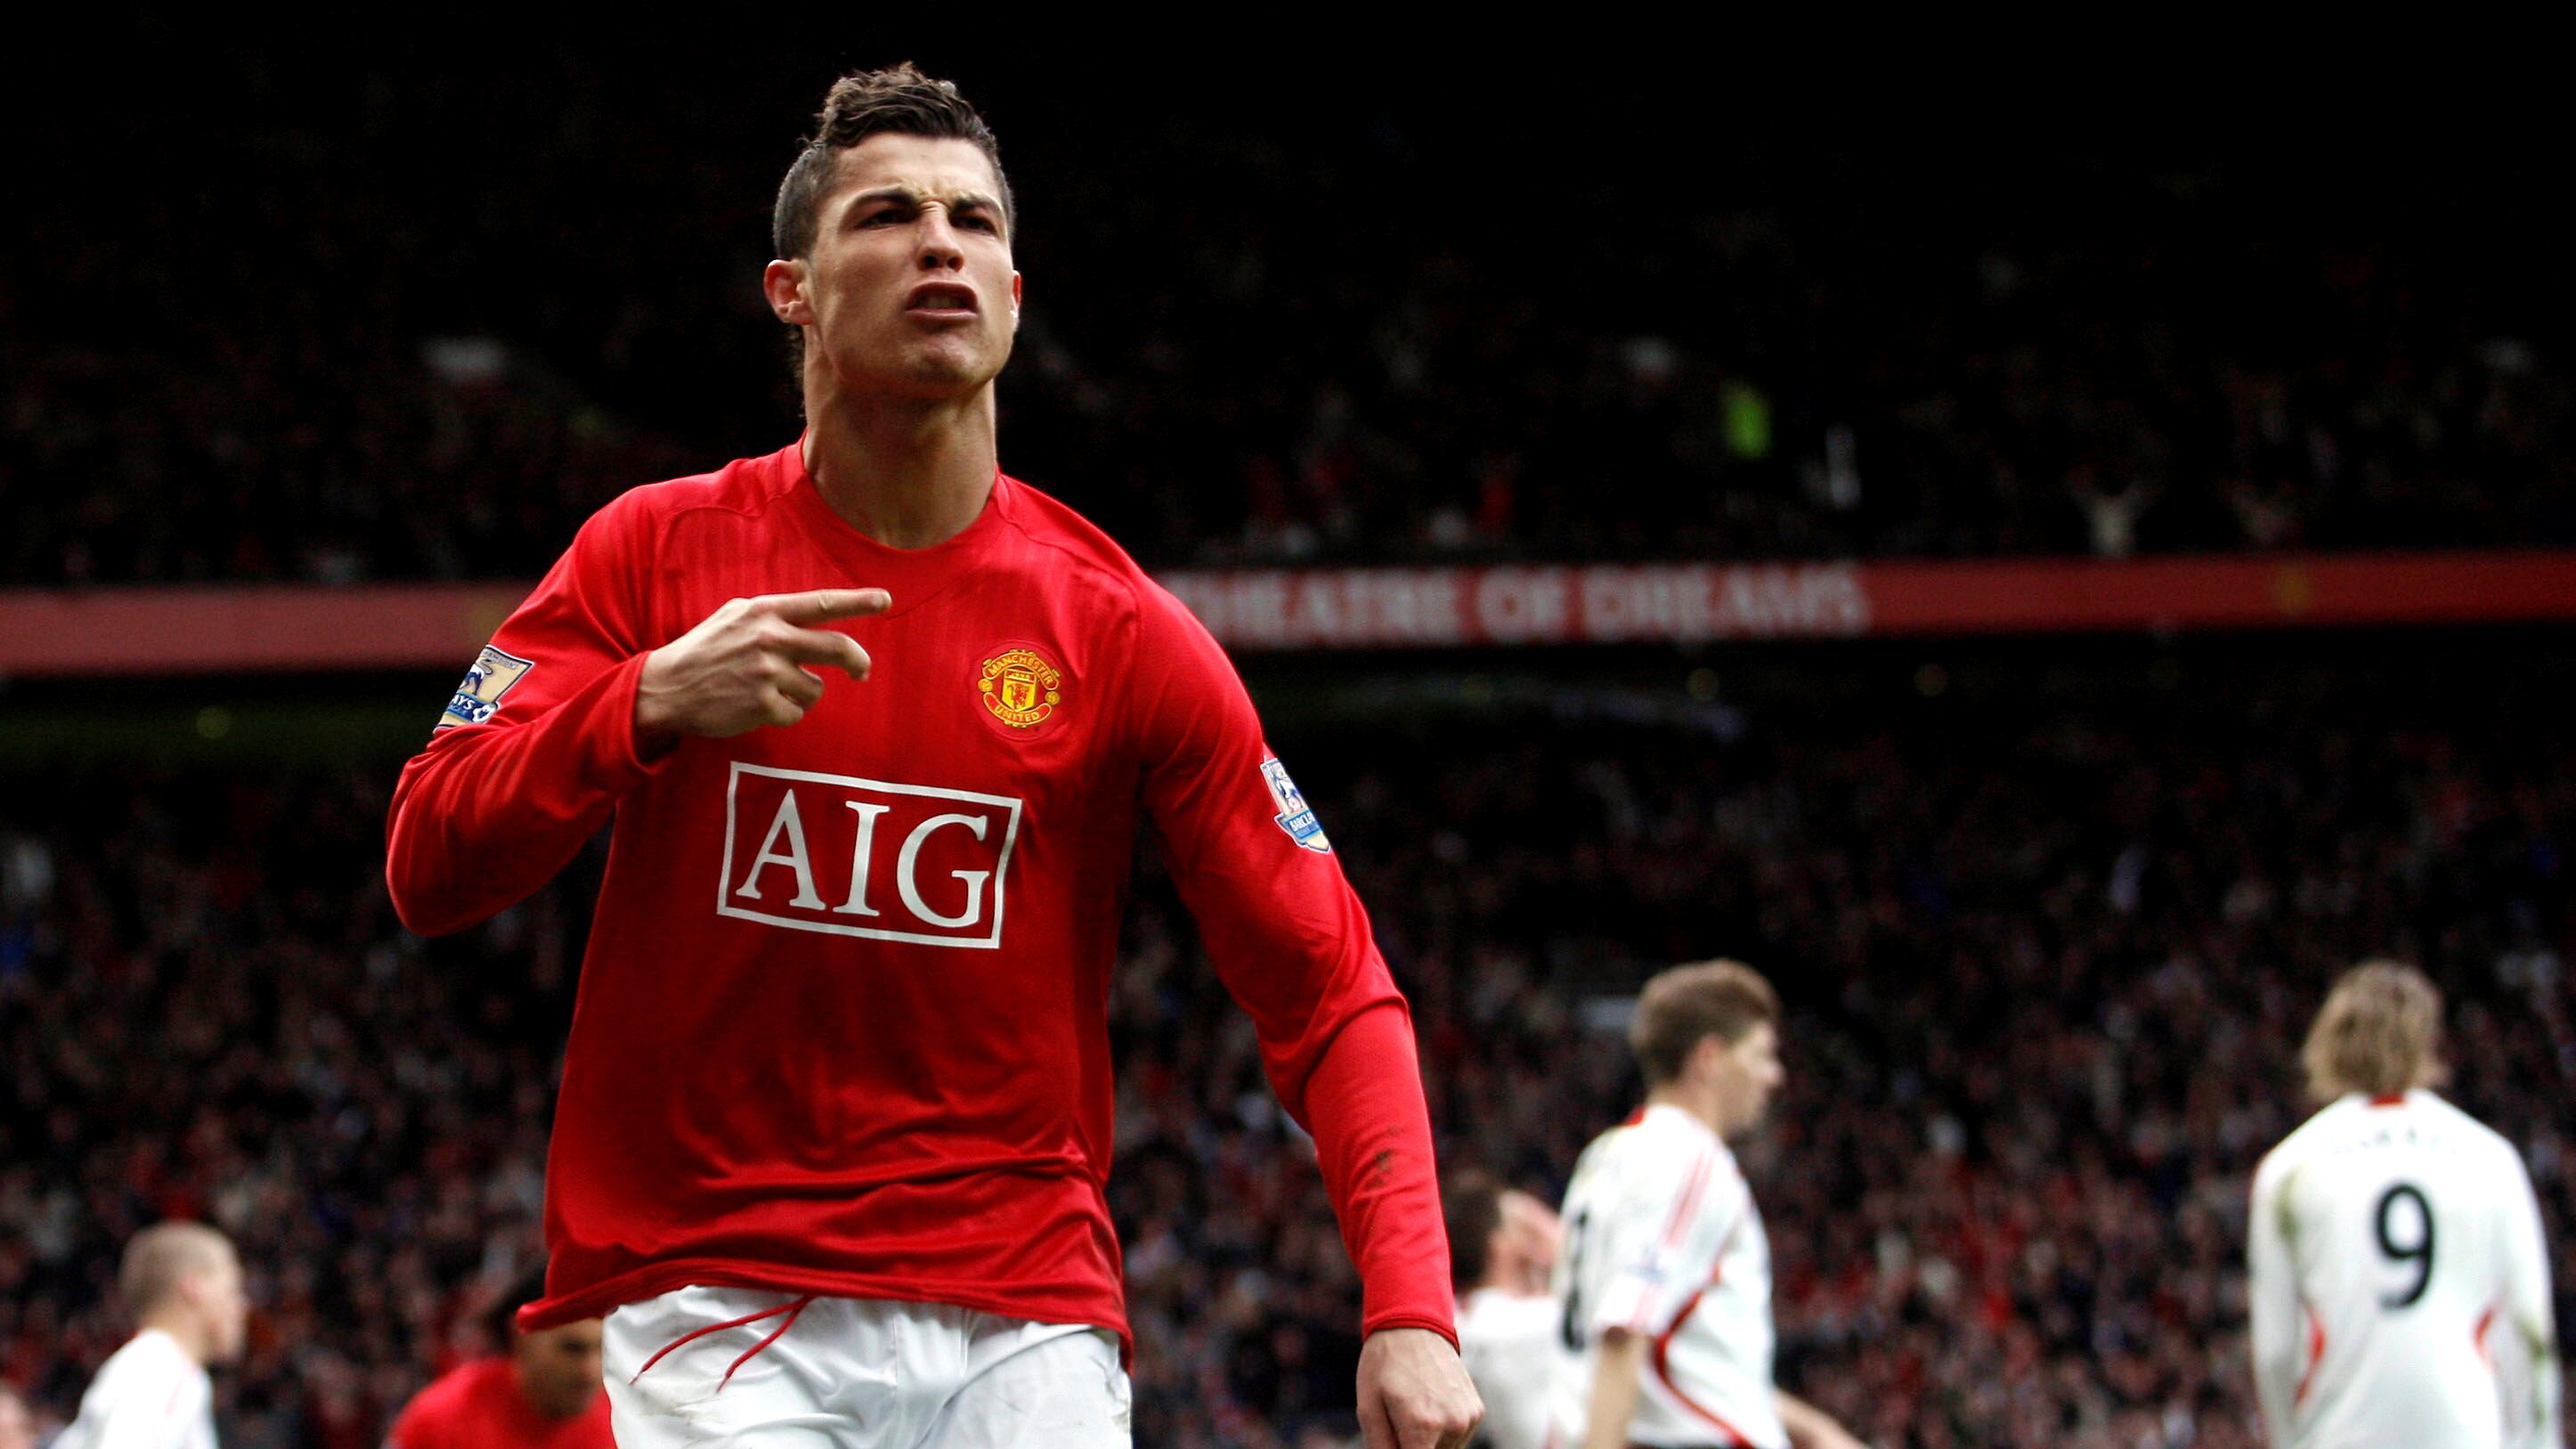 The key call for the arrival of Cristiano Ronaldo to Manchester United